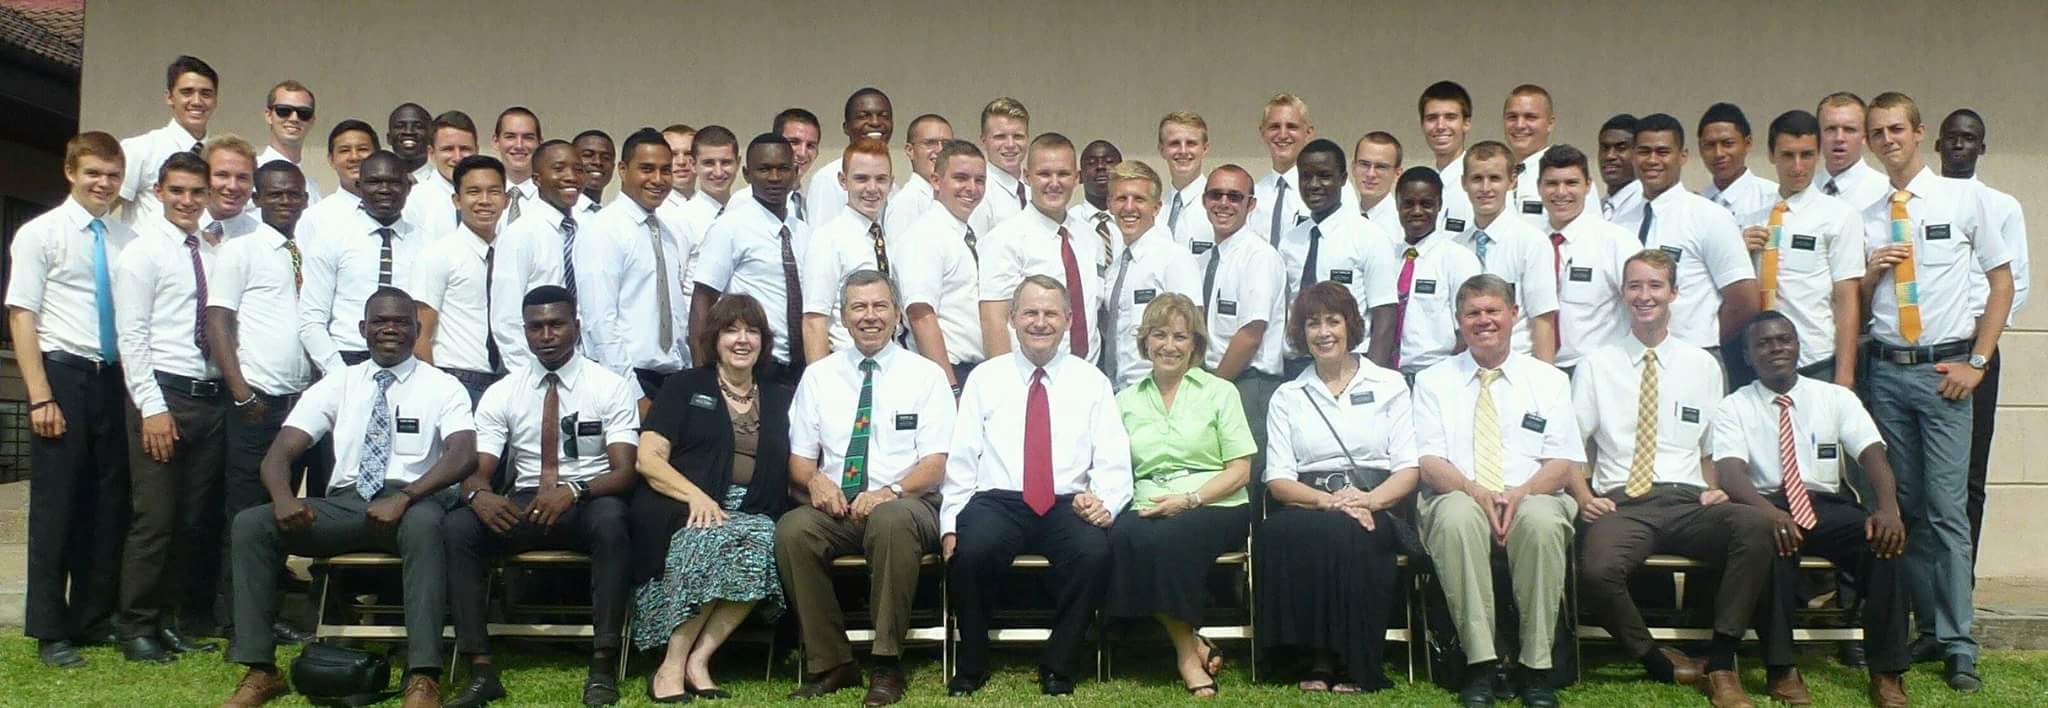 Banner image showing misionaries pictures from Ghana Accra west Mission